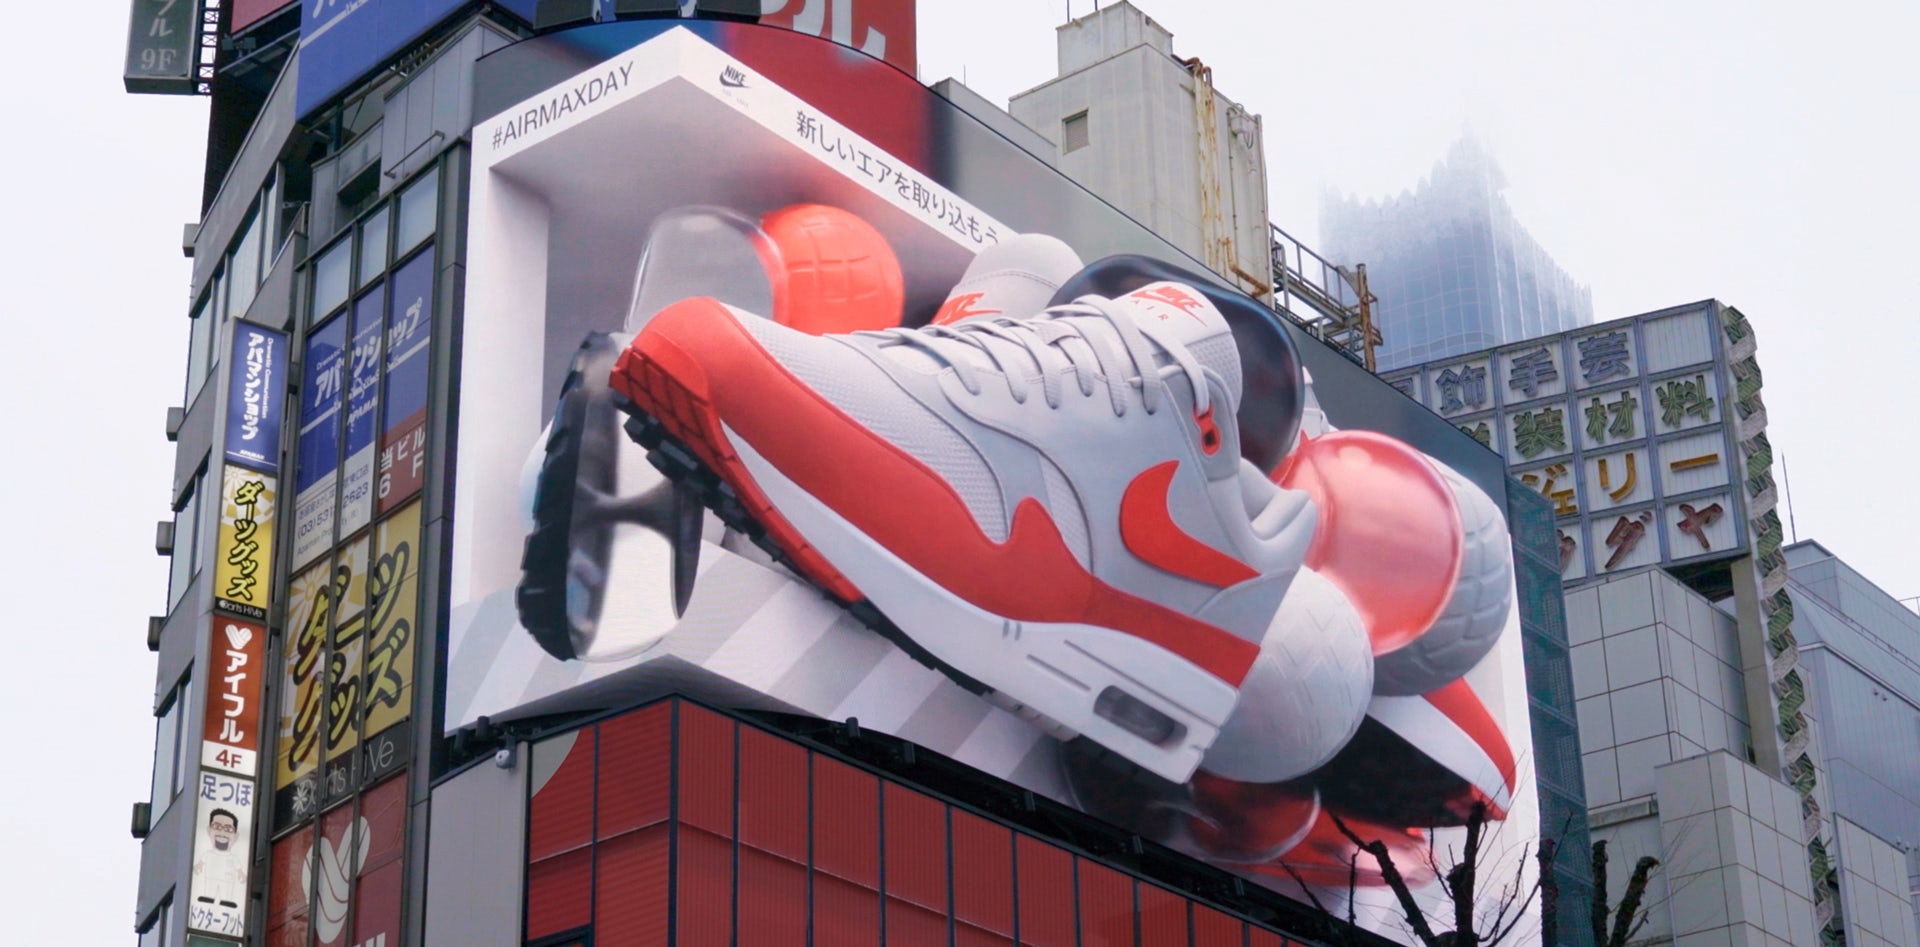 Here's What Was In The Giant Nike Shoe Box from Air Max Day 